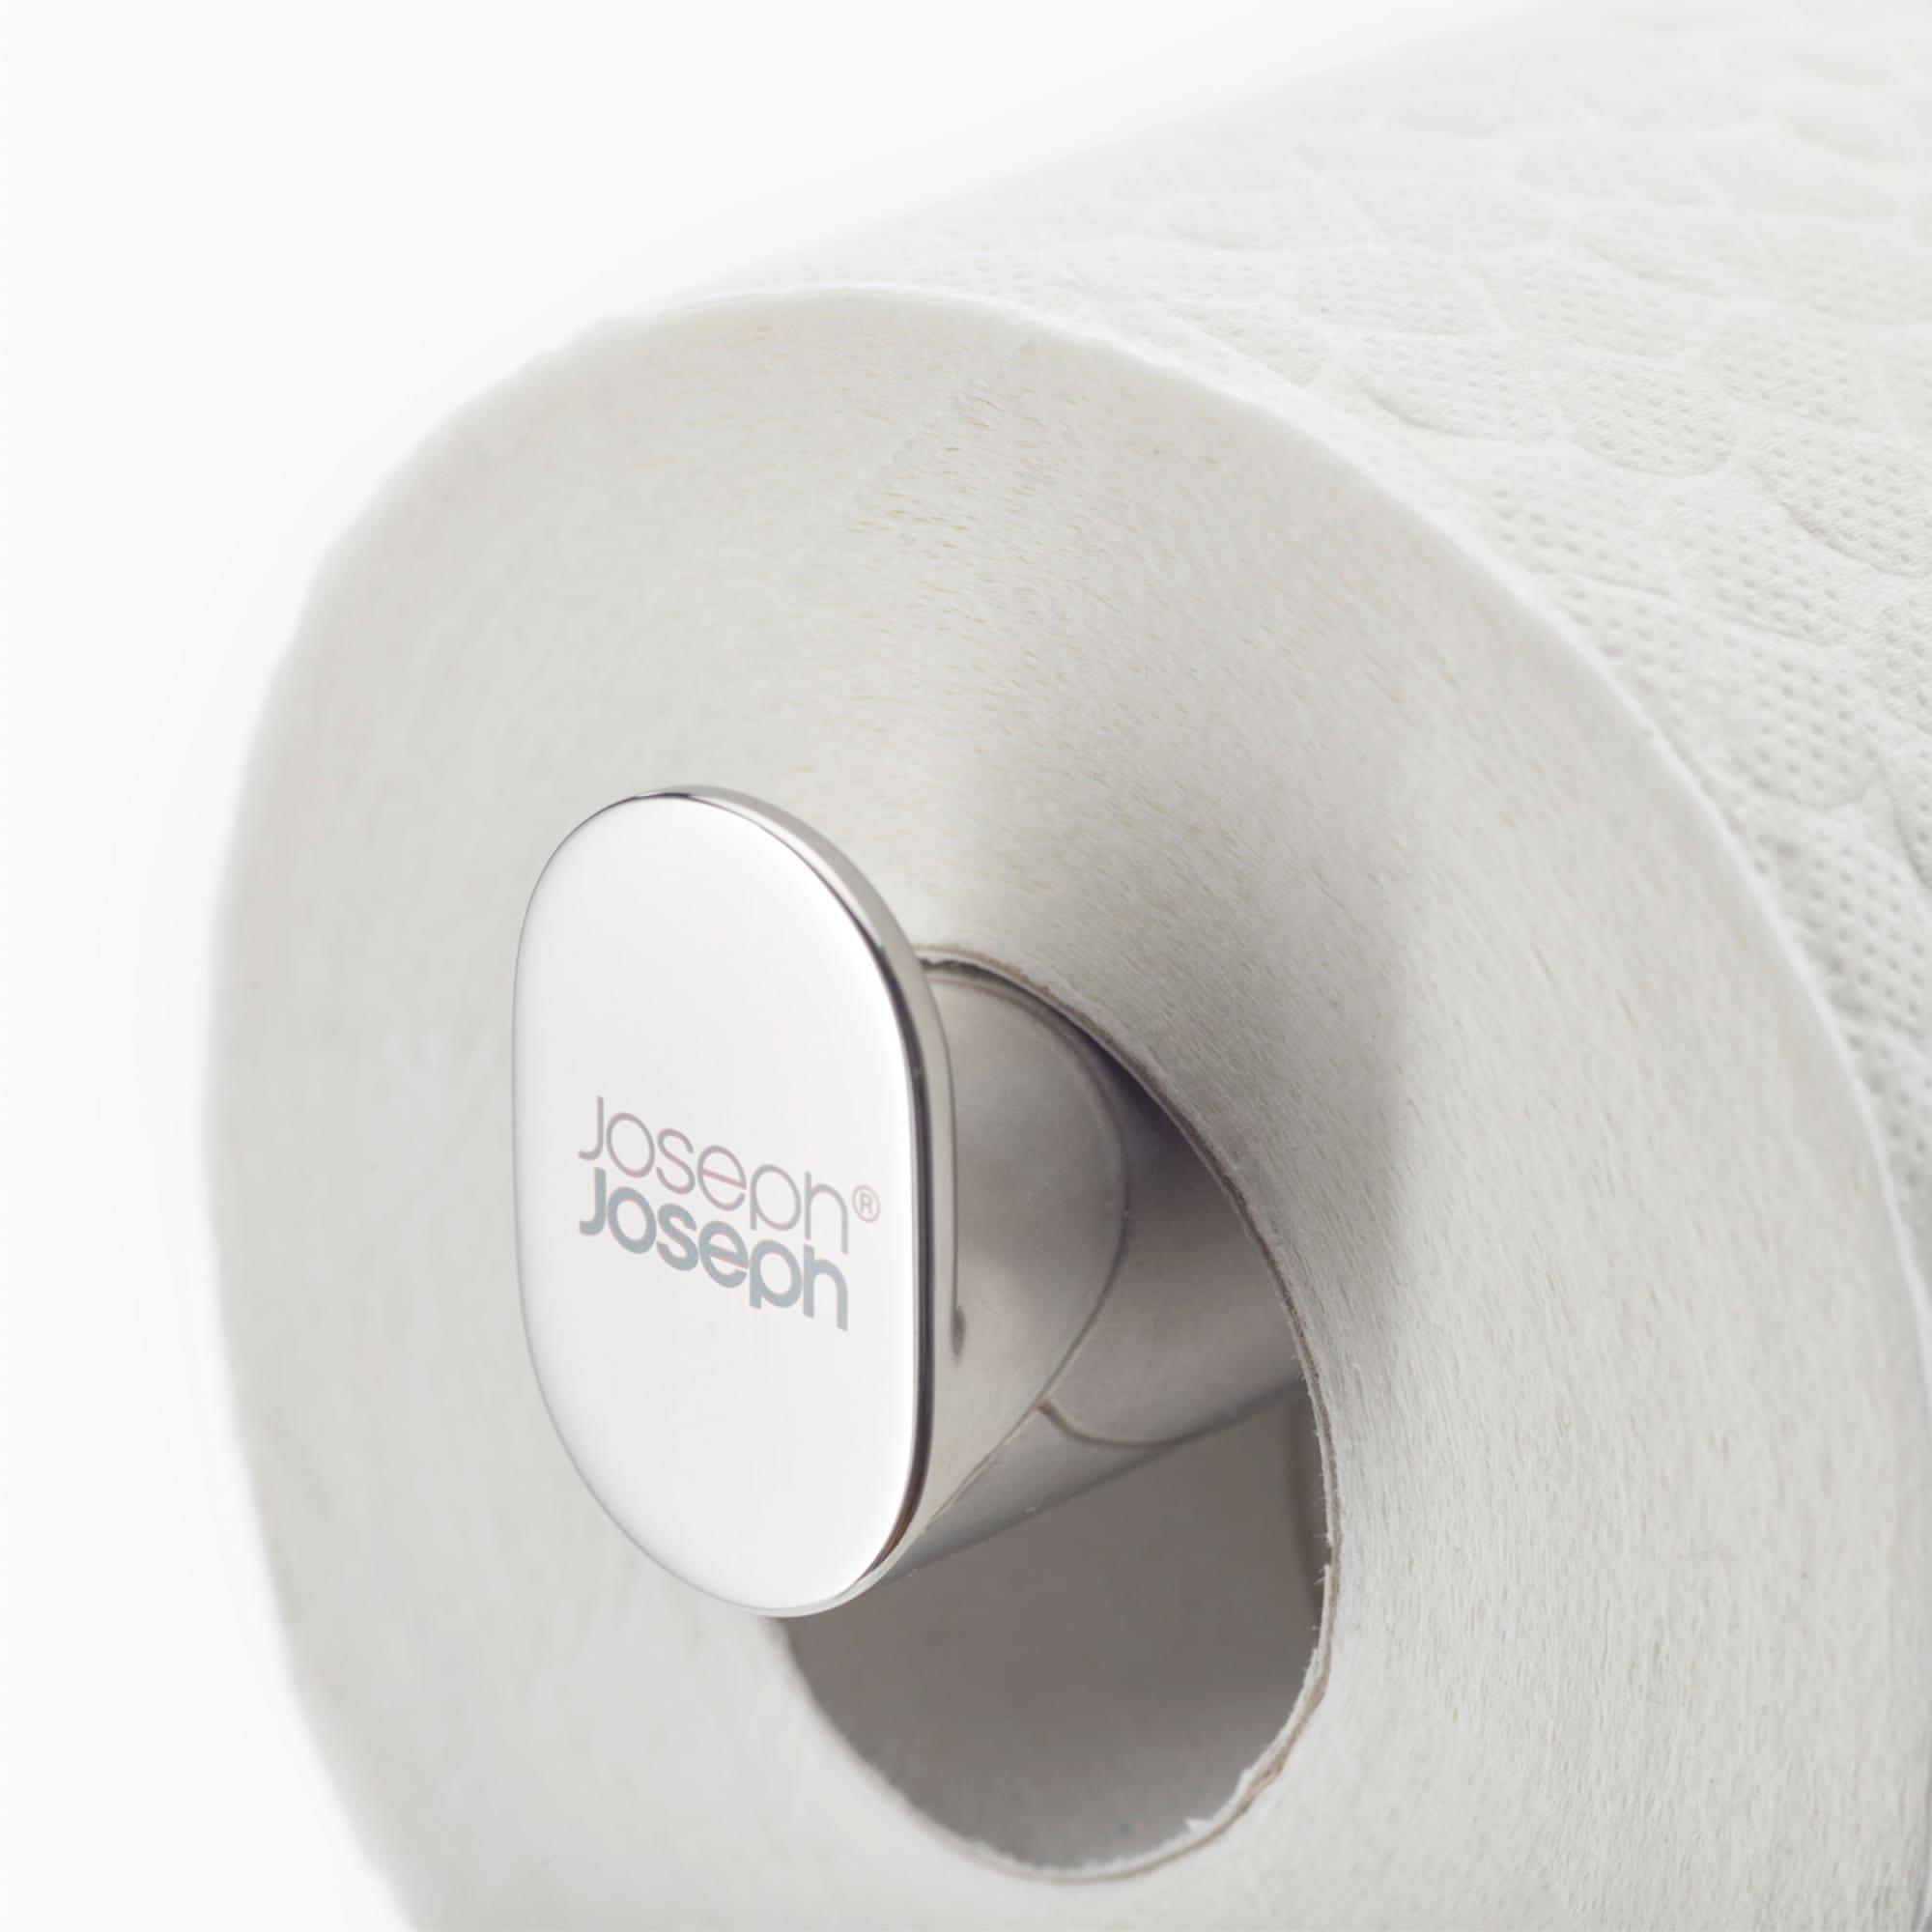 Joseph Joseph EasyStore Luxe 2 in 1 Toilet Roll Stand Image 9